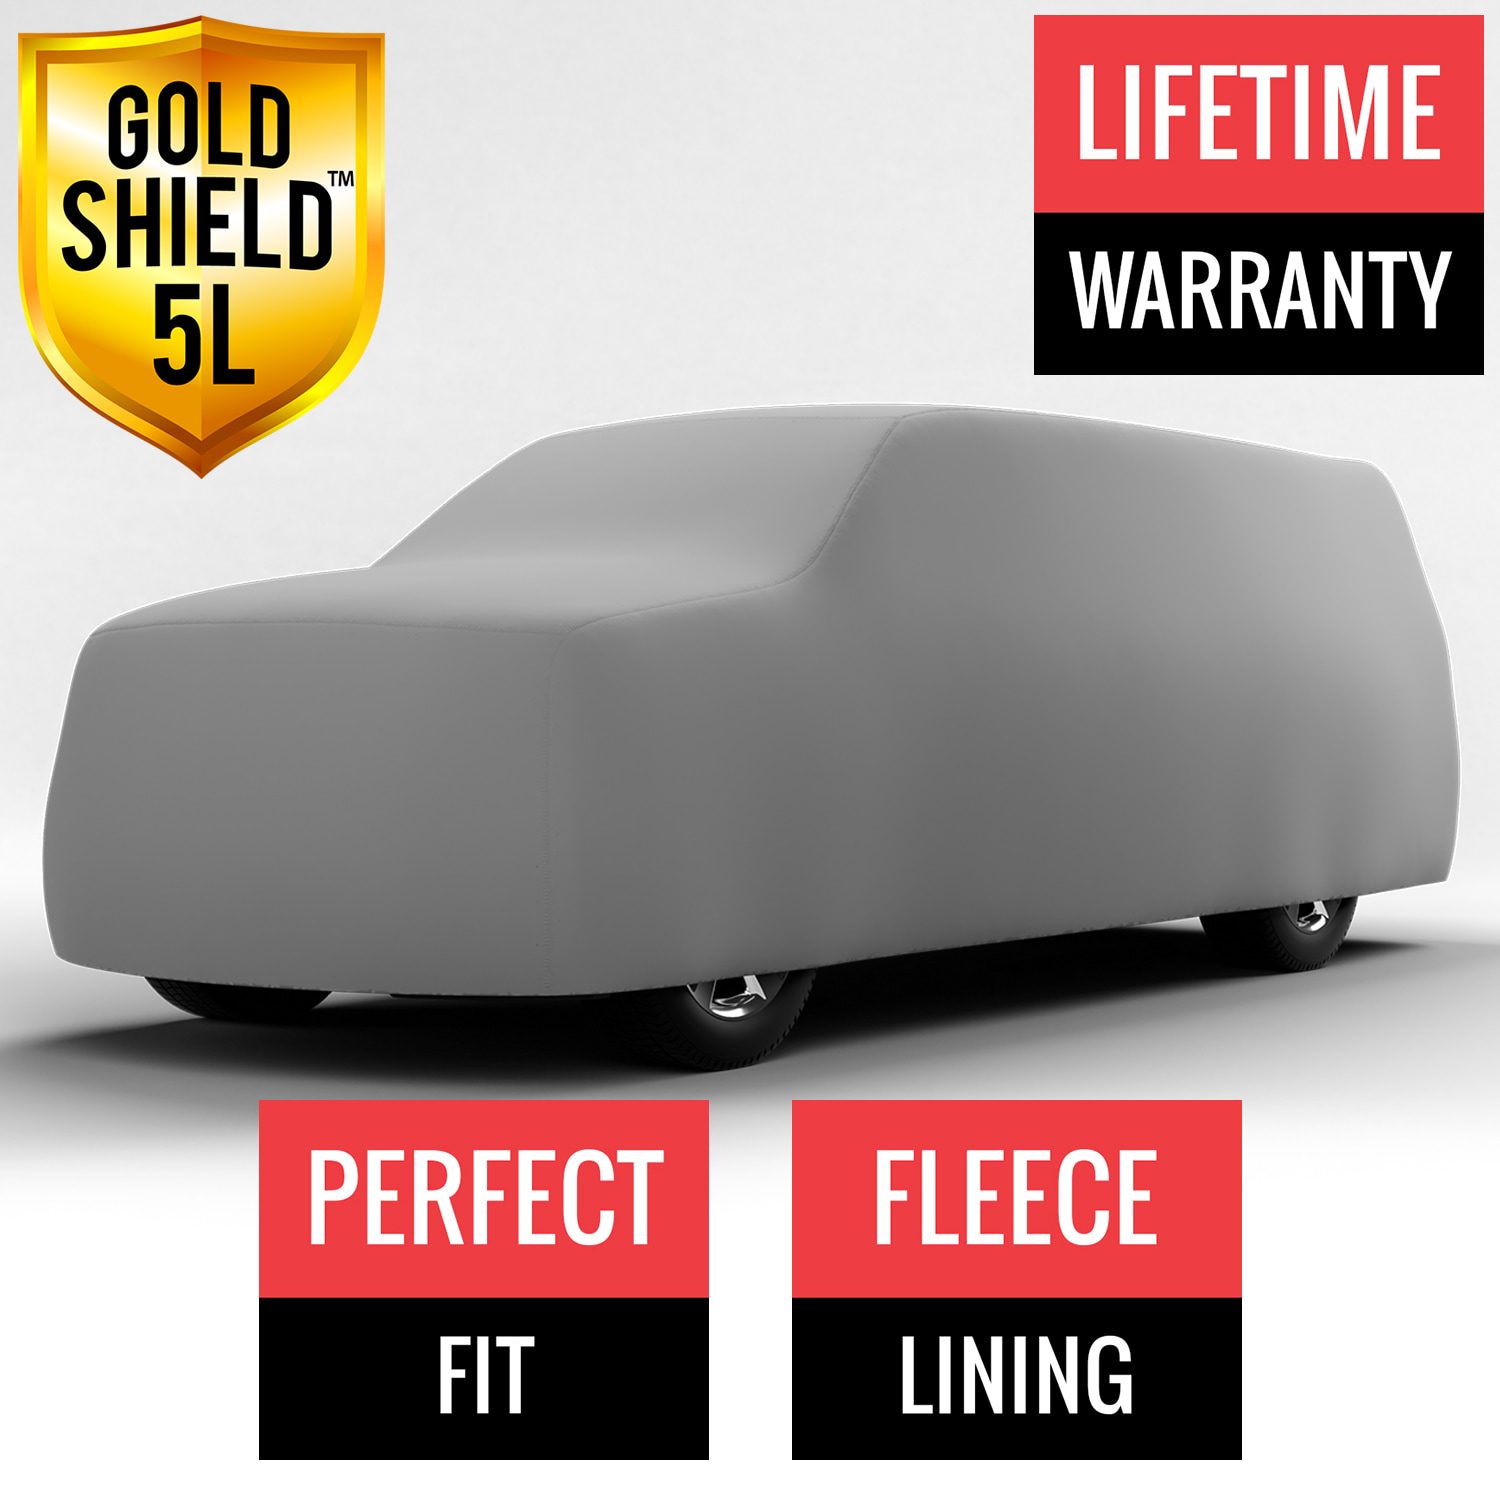 Gold Shield 5L - Car Cover for GMC K3500 Pickup 1967 Regular Cab Pickup 8.0 Feet Bed with Camper Shell